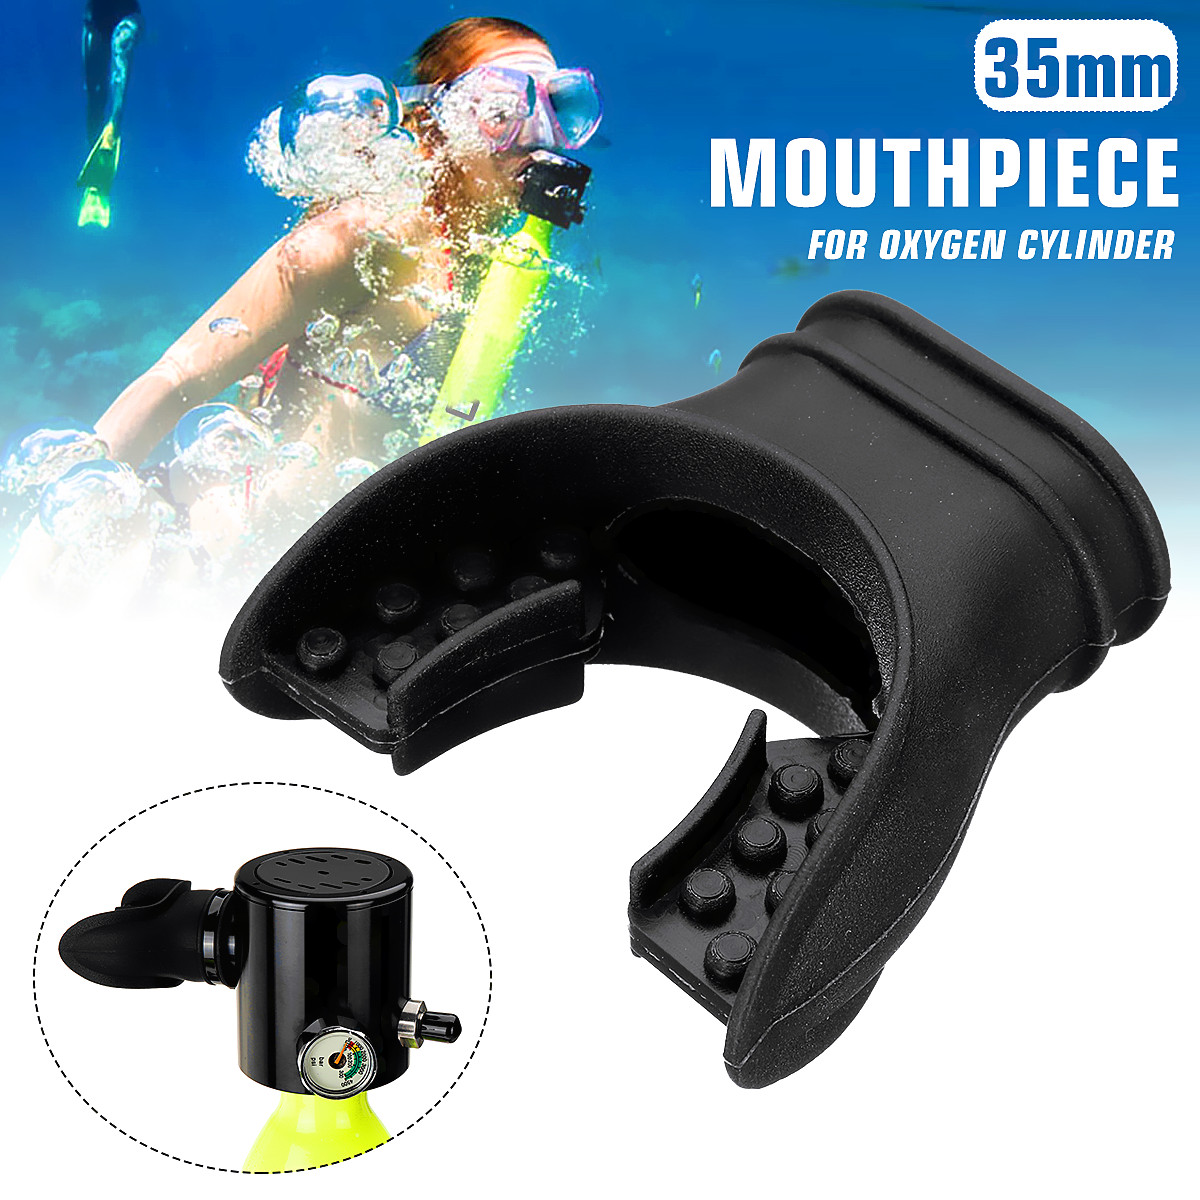 Black-Silicone-Mouthpiece-for-Portable-Oxygen-Air-Cylinder-Scuba-Air-Tank-Diving-Equipment-w-Tie-1450280